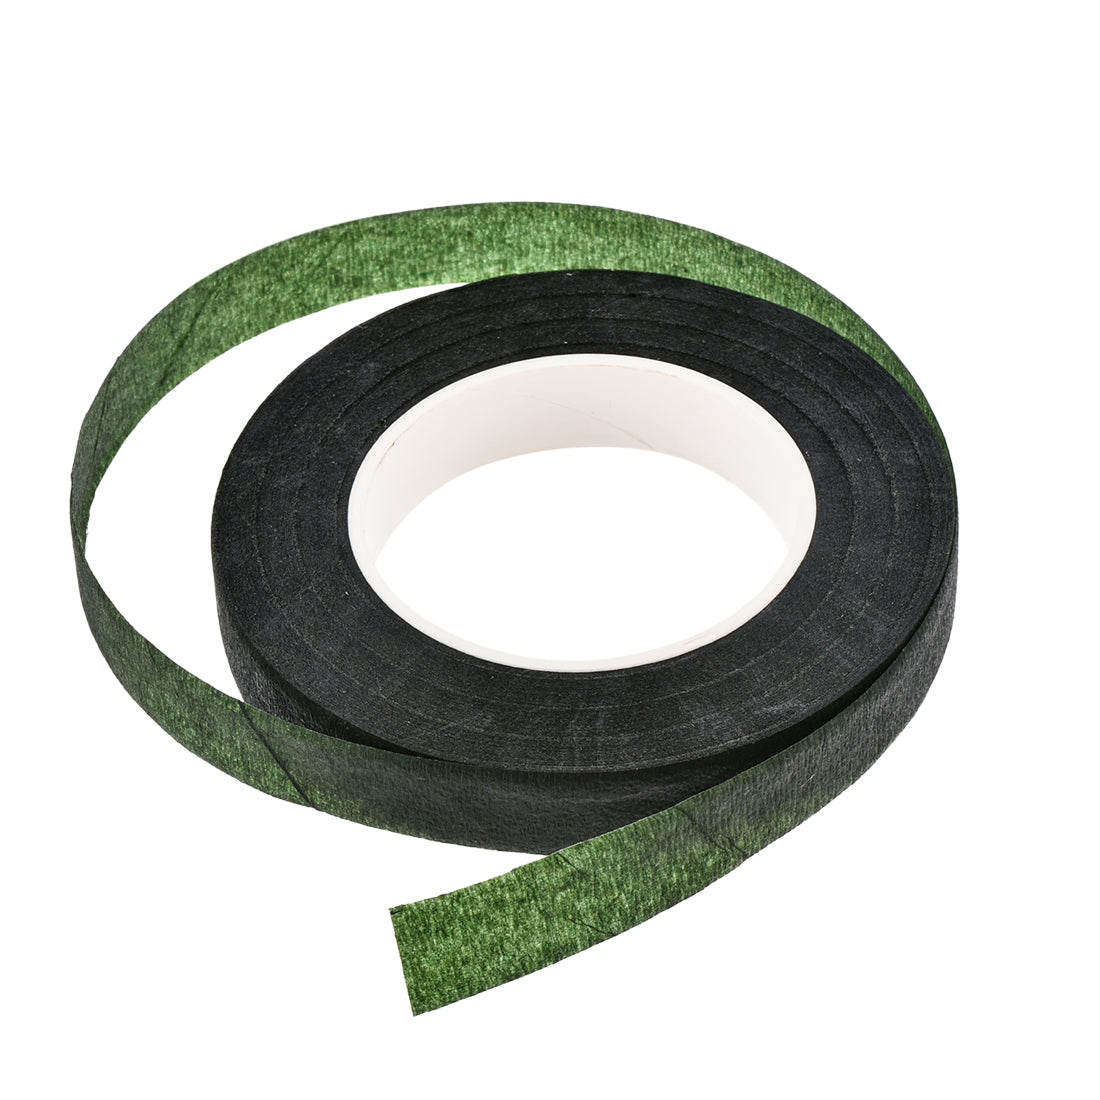 uxcell Uxcell 4Roll 1/2"x30Yard Dark Green Floral Tape Flower Adhesives Floral Arrangement